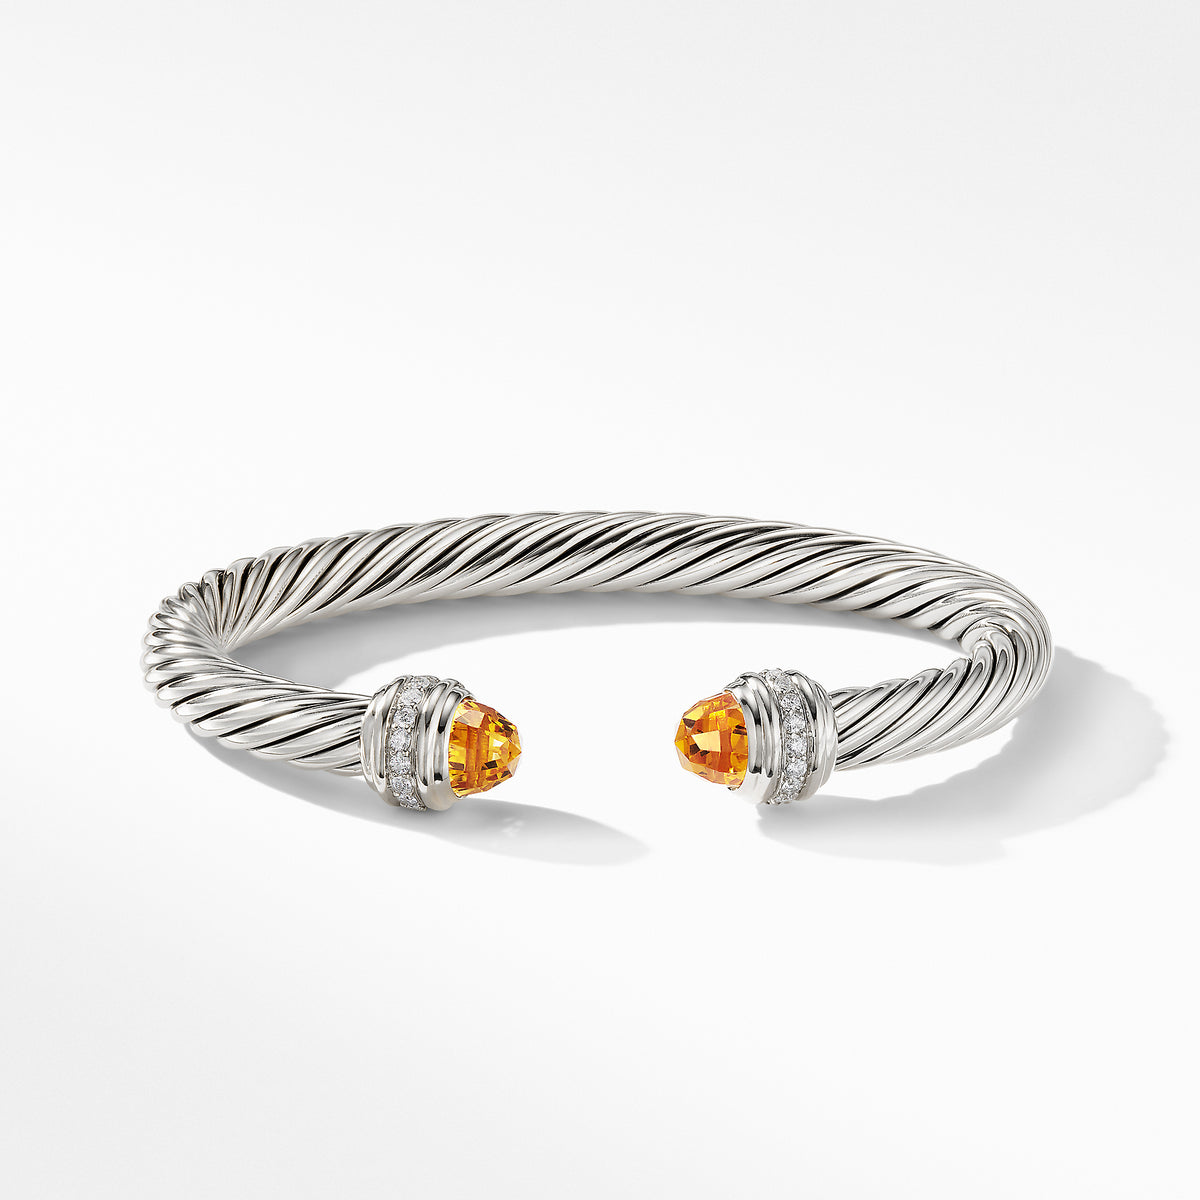 Cable Bracelet with Citrine and Diamonds